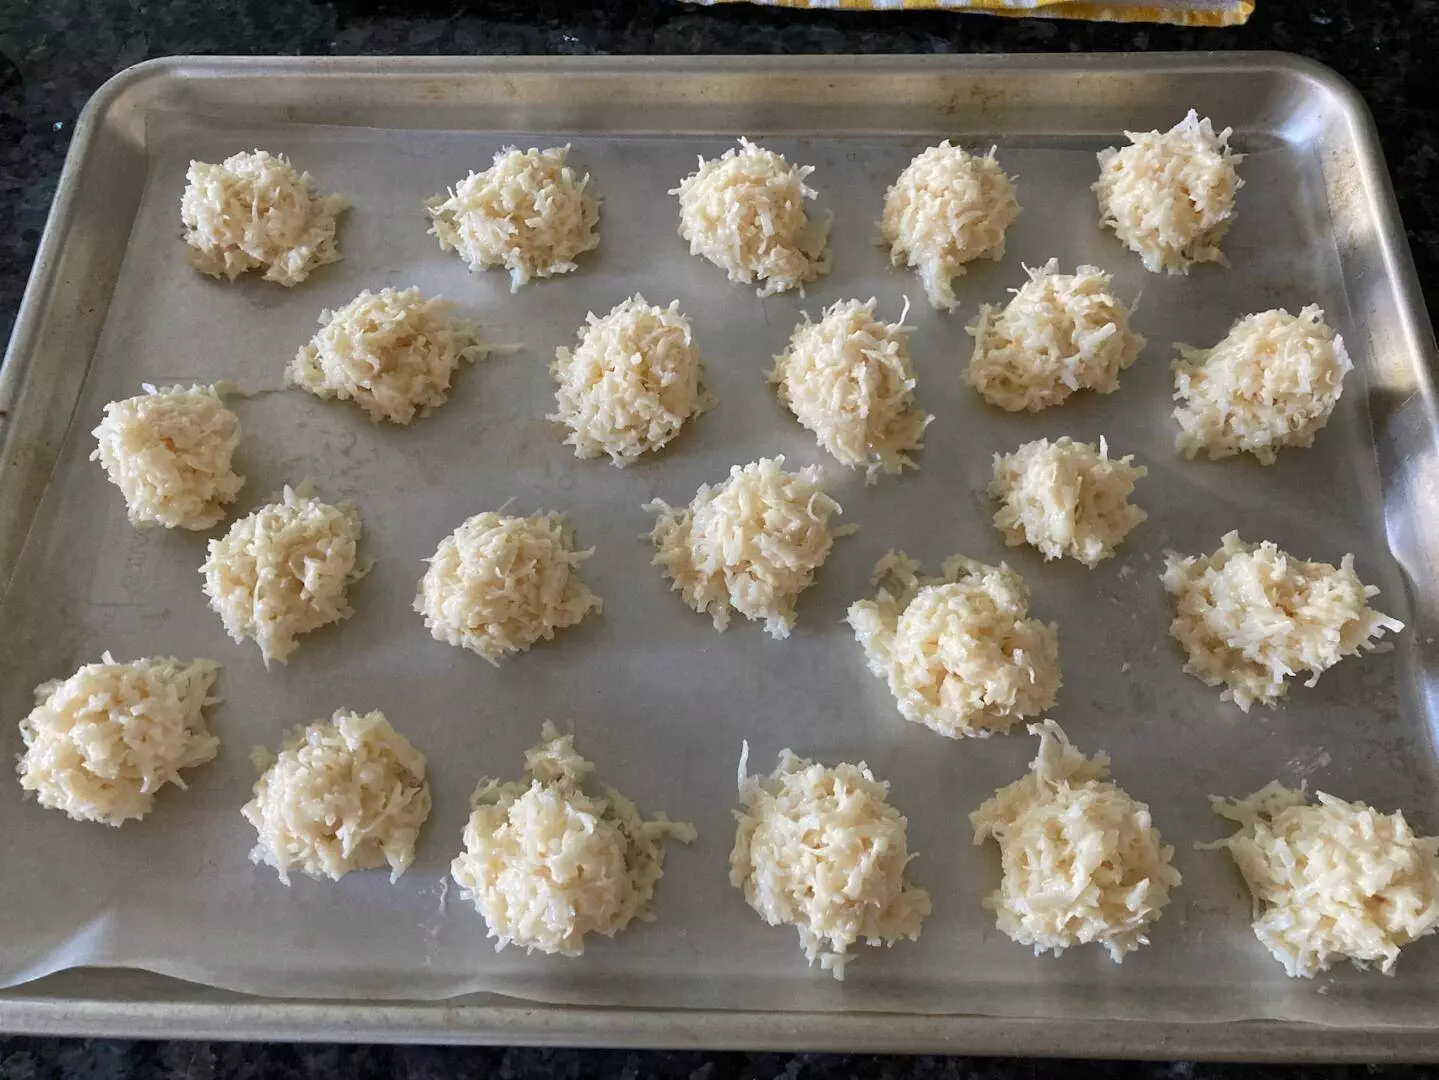 Easy Chocolate Coconut Balls from Out of the Box Baking.com